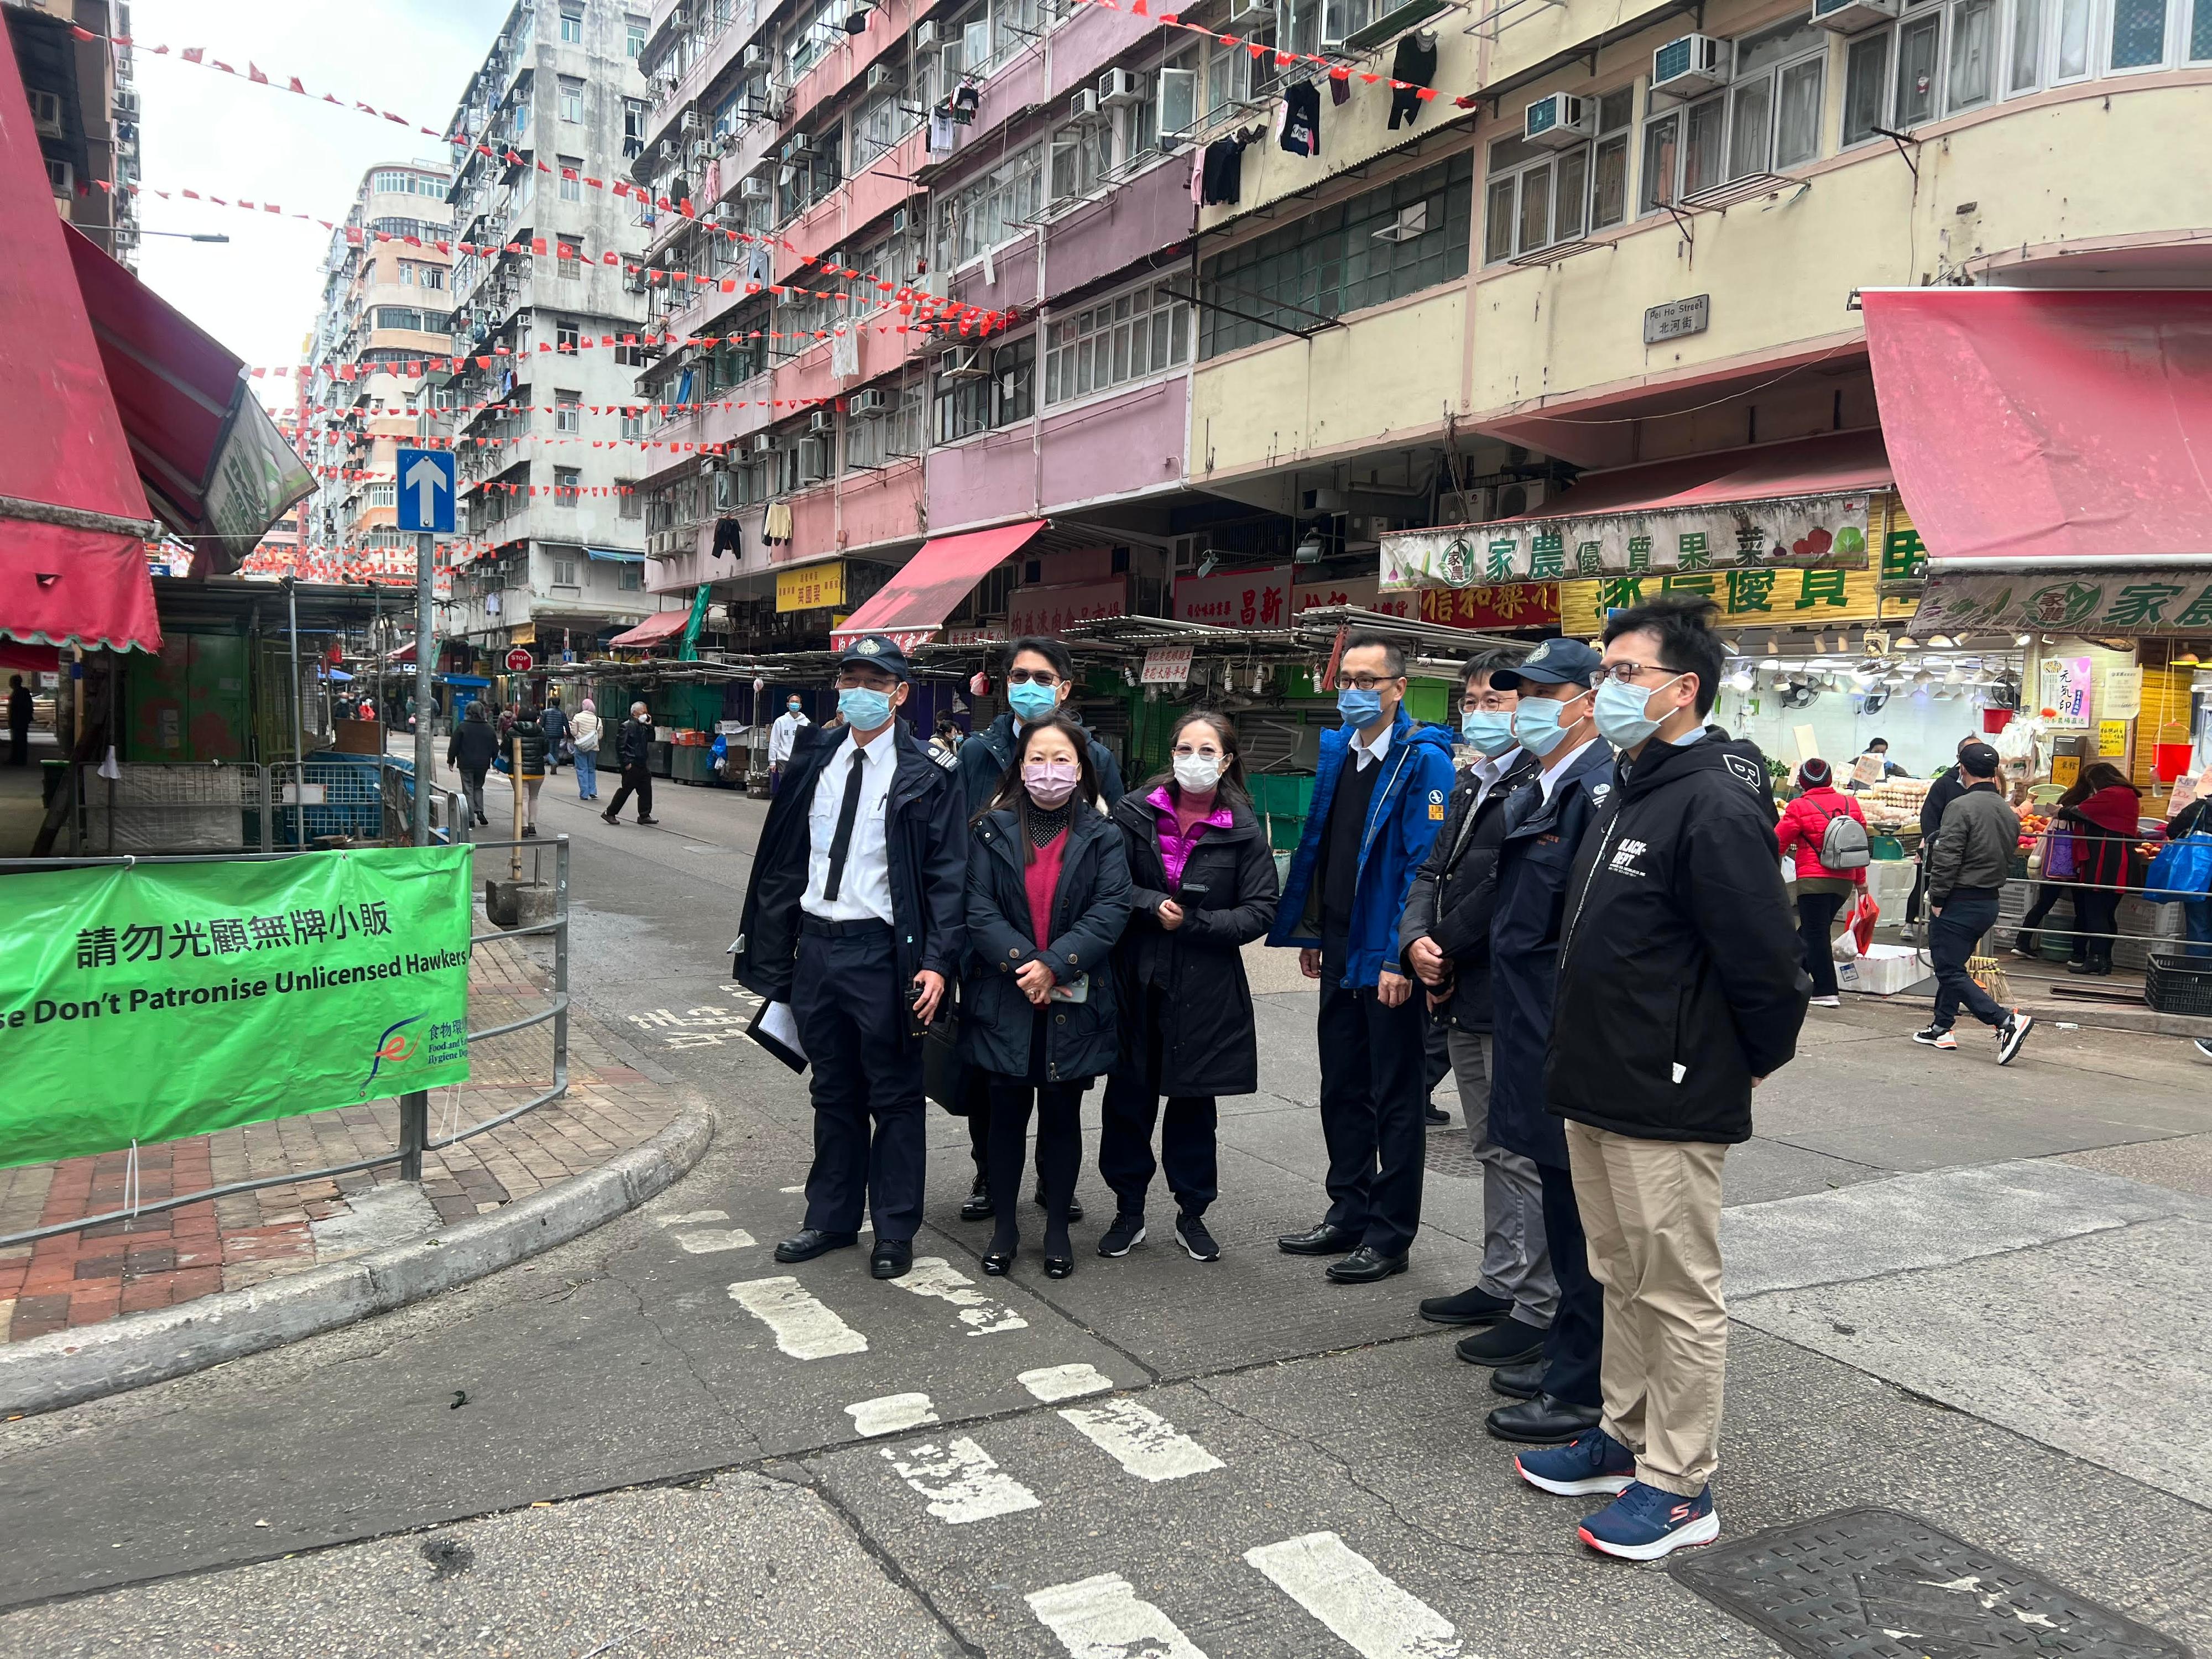 To keep passageways clear, the Food and Environmental Hygiene Department stepped up inspections and enforcements at the streets around Pei Ho Street Market area in Sham Shui Po. Photo shows Deputy Director of Food and Environmental Hygiene, Miss Diane Wong (fourth left) inspecting the vicinity of Pei Ho Street Market during the Lunar New Year. 